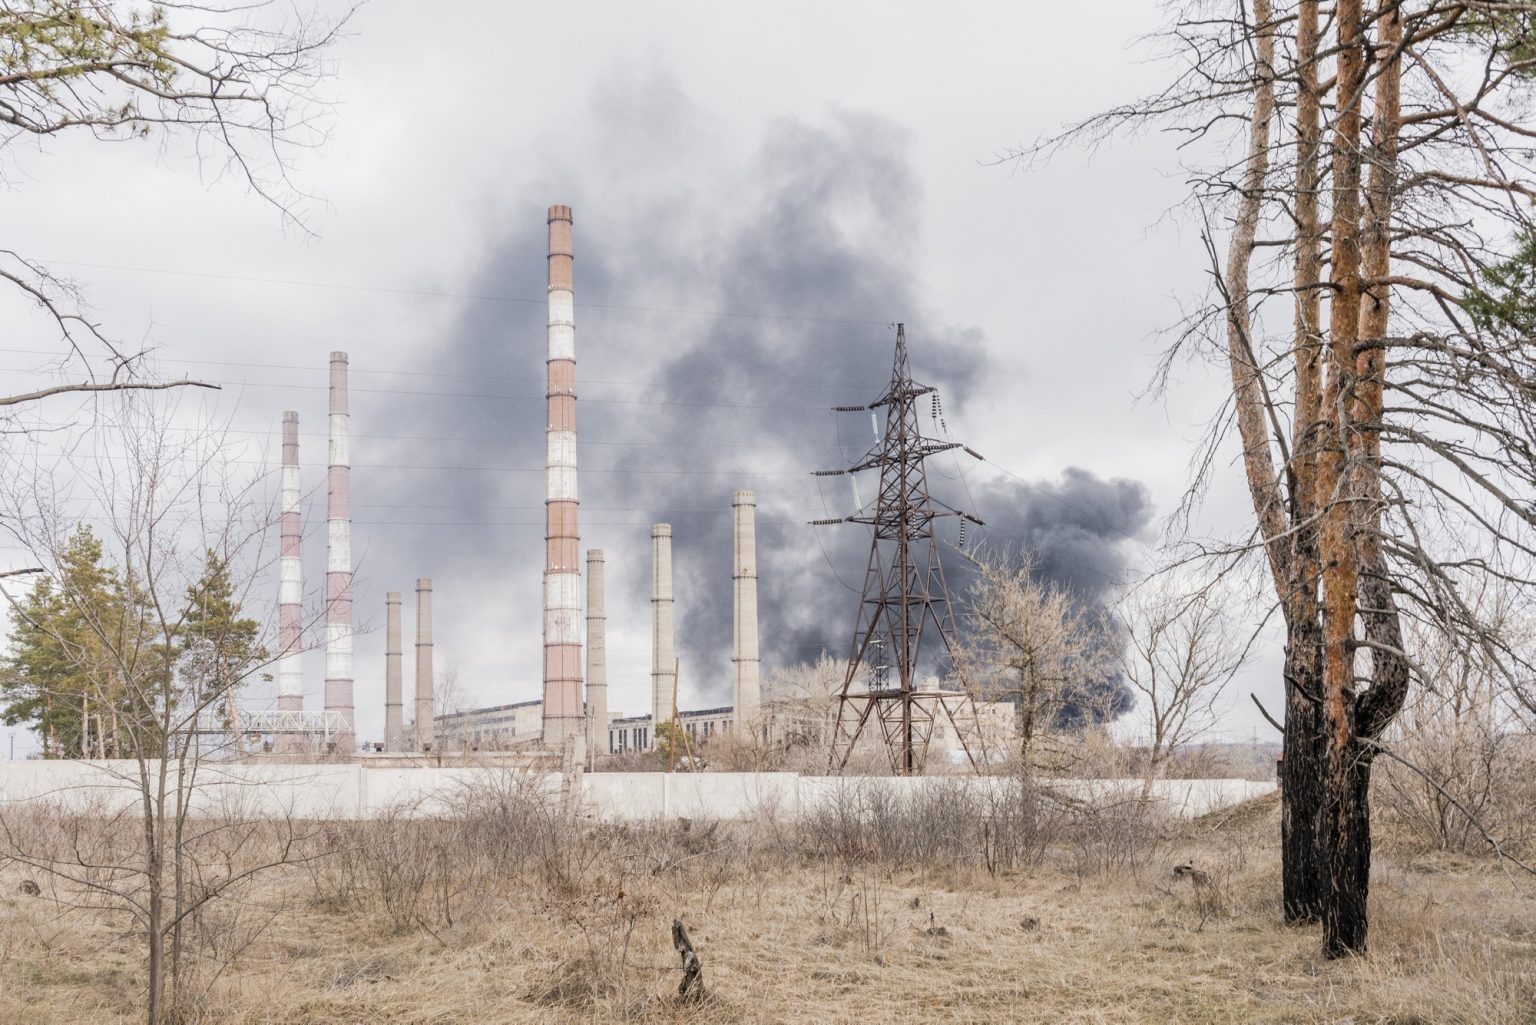 01563839 UKRAINE, Schastia. February 22, 2022 - Smoke rises from the power plant during hevy shelling in Schastia. *** Local Caption *** 01563839